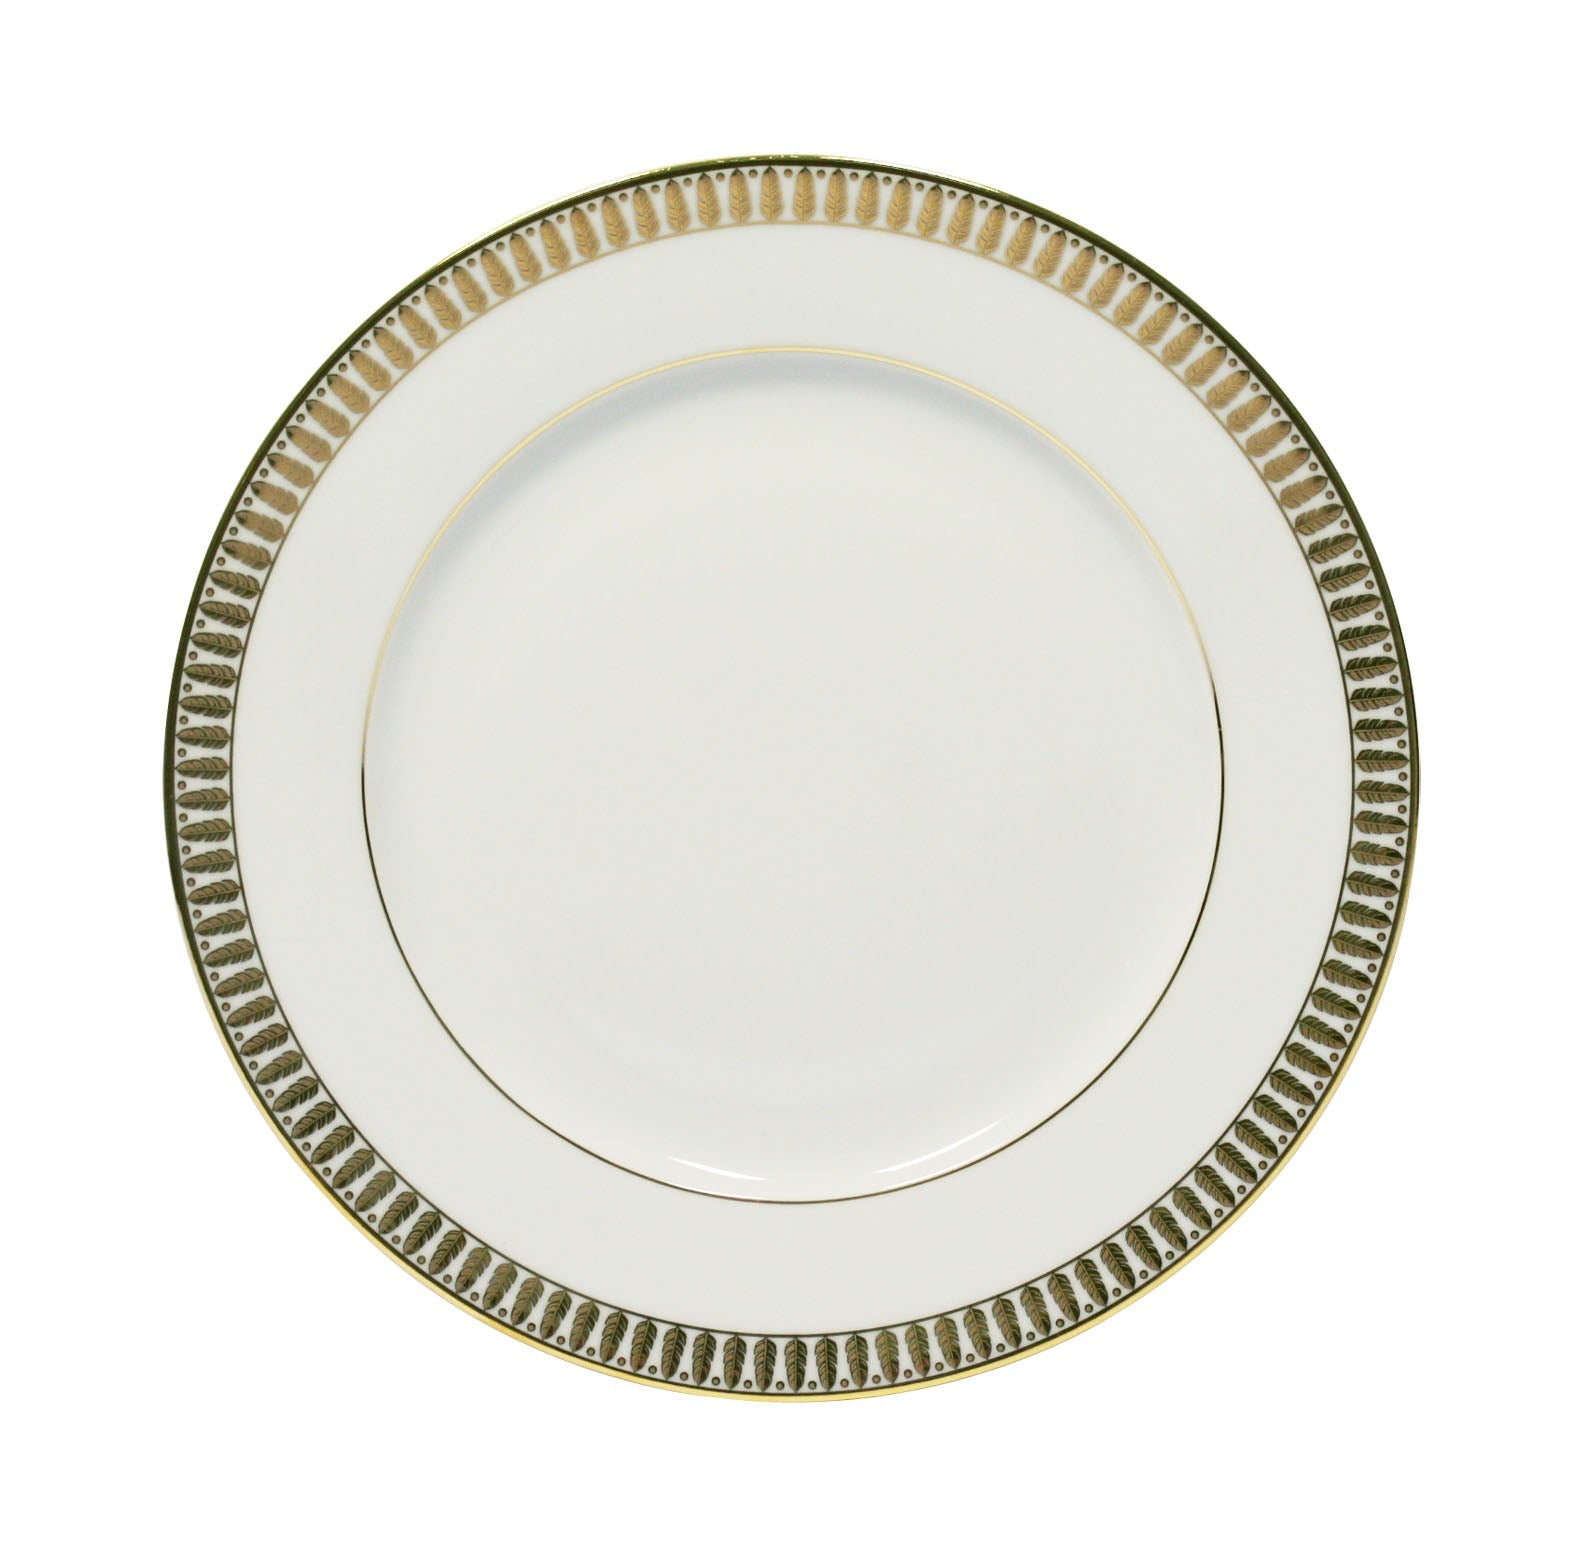 Plumes Salad Plate in Gold